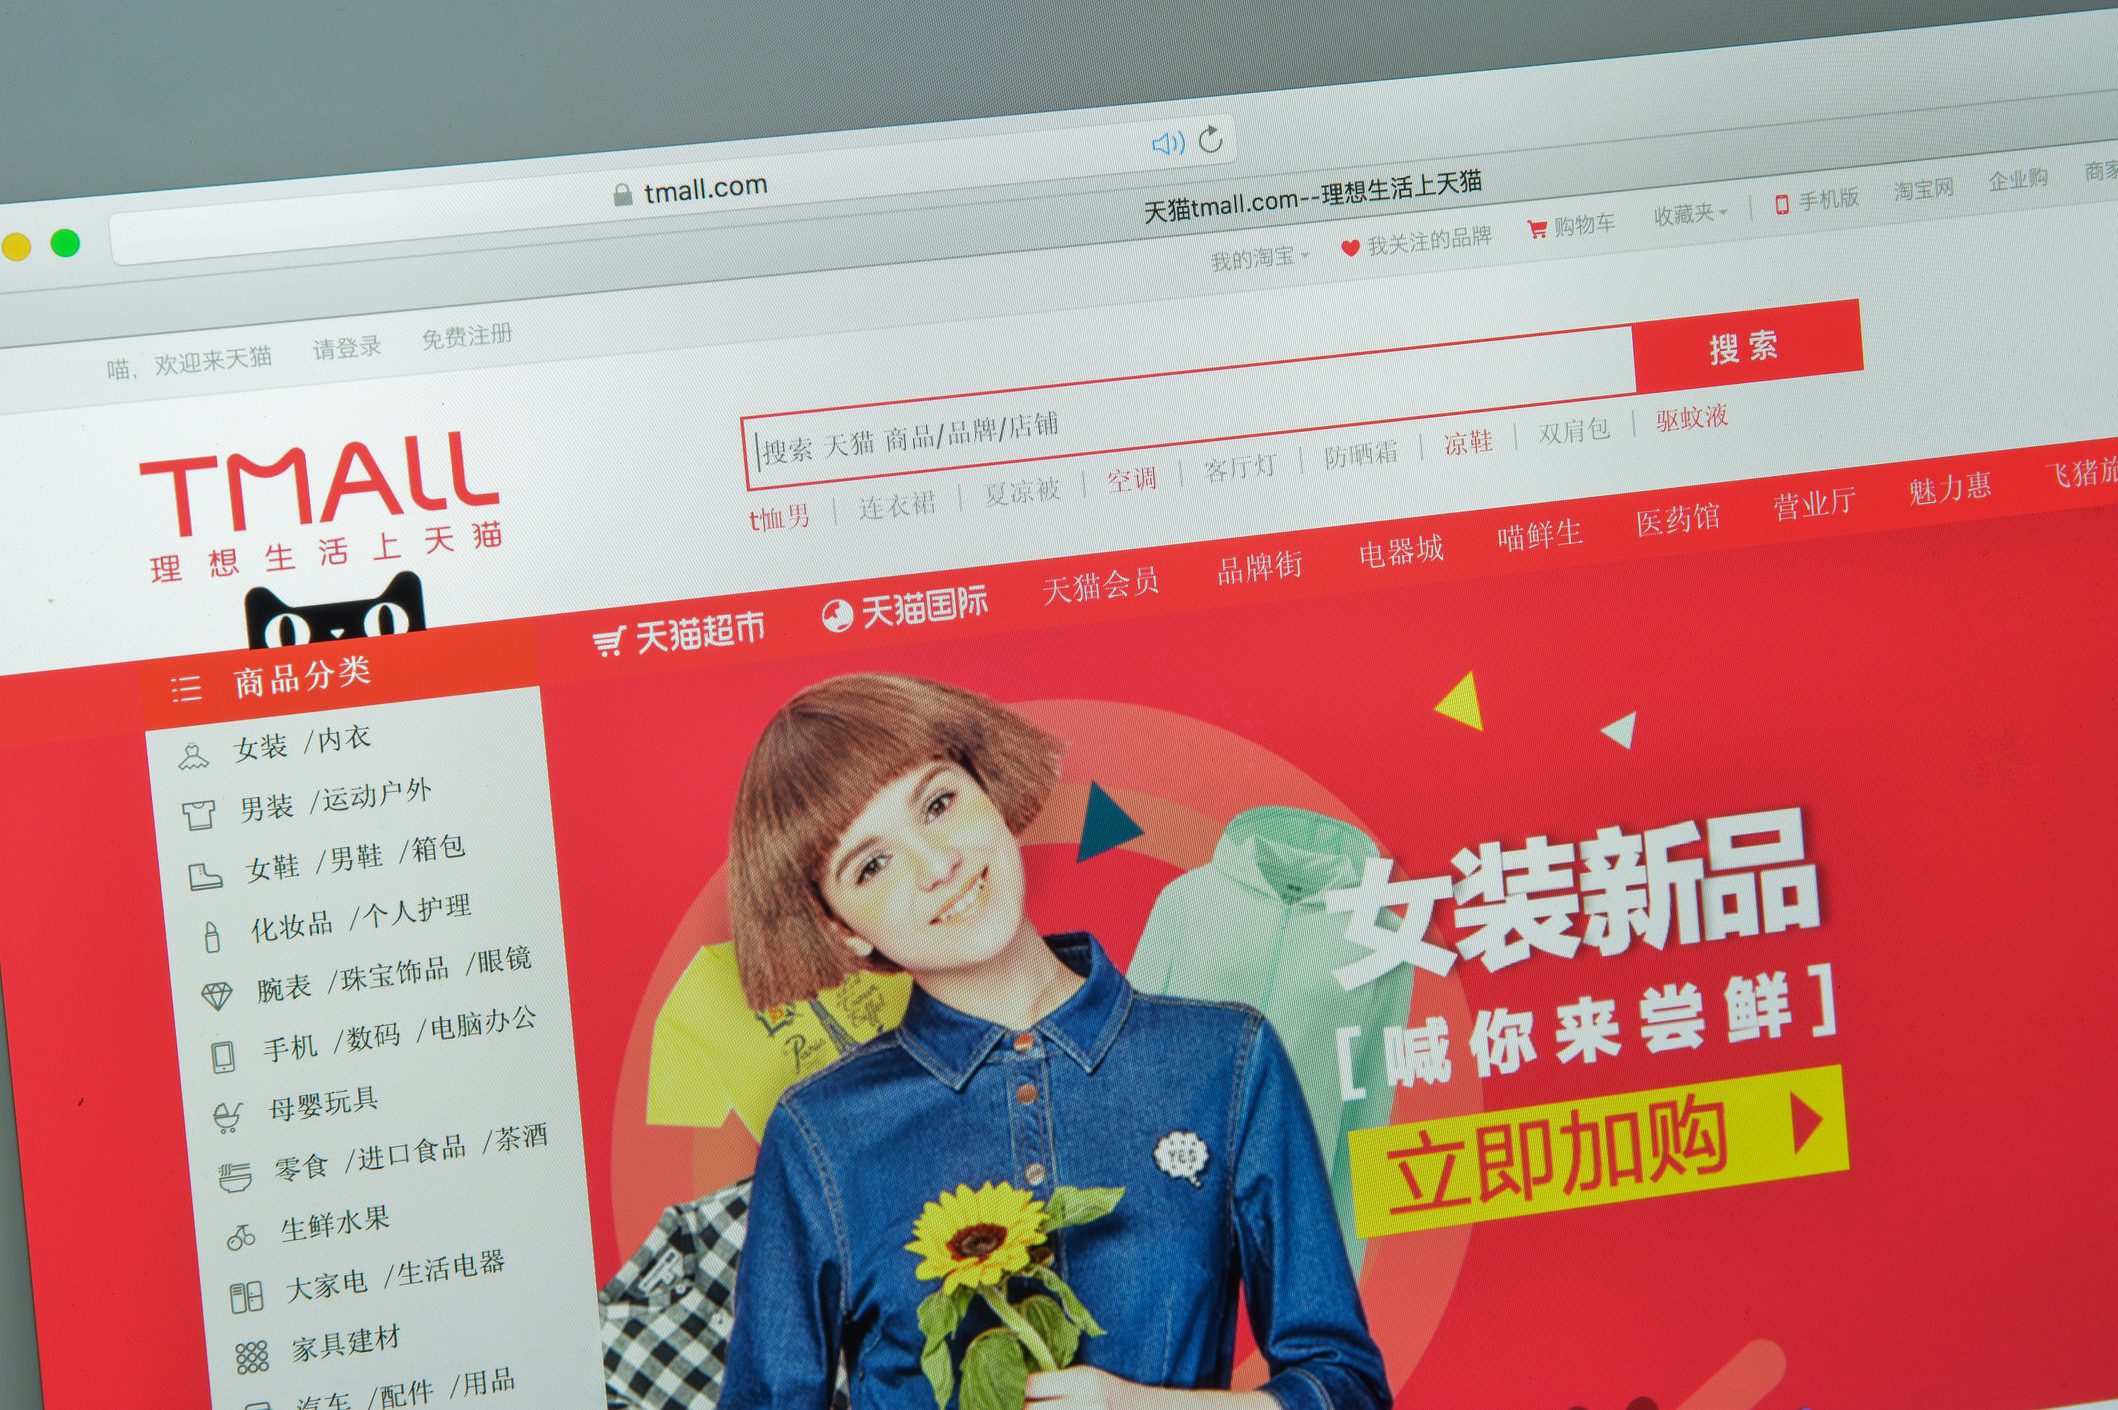 Taobao drops presale strategy for 618 festival amid “user first” prioritization · TechNode #chicomnews